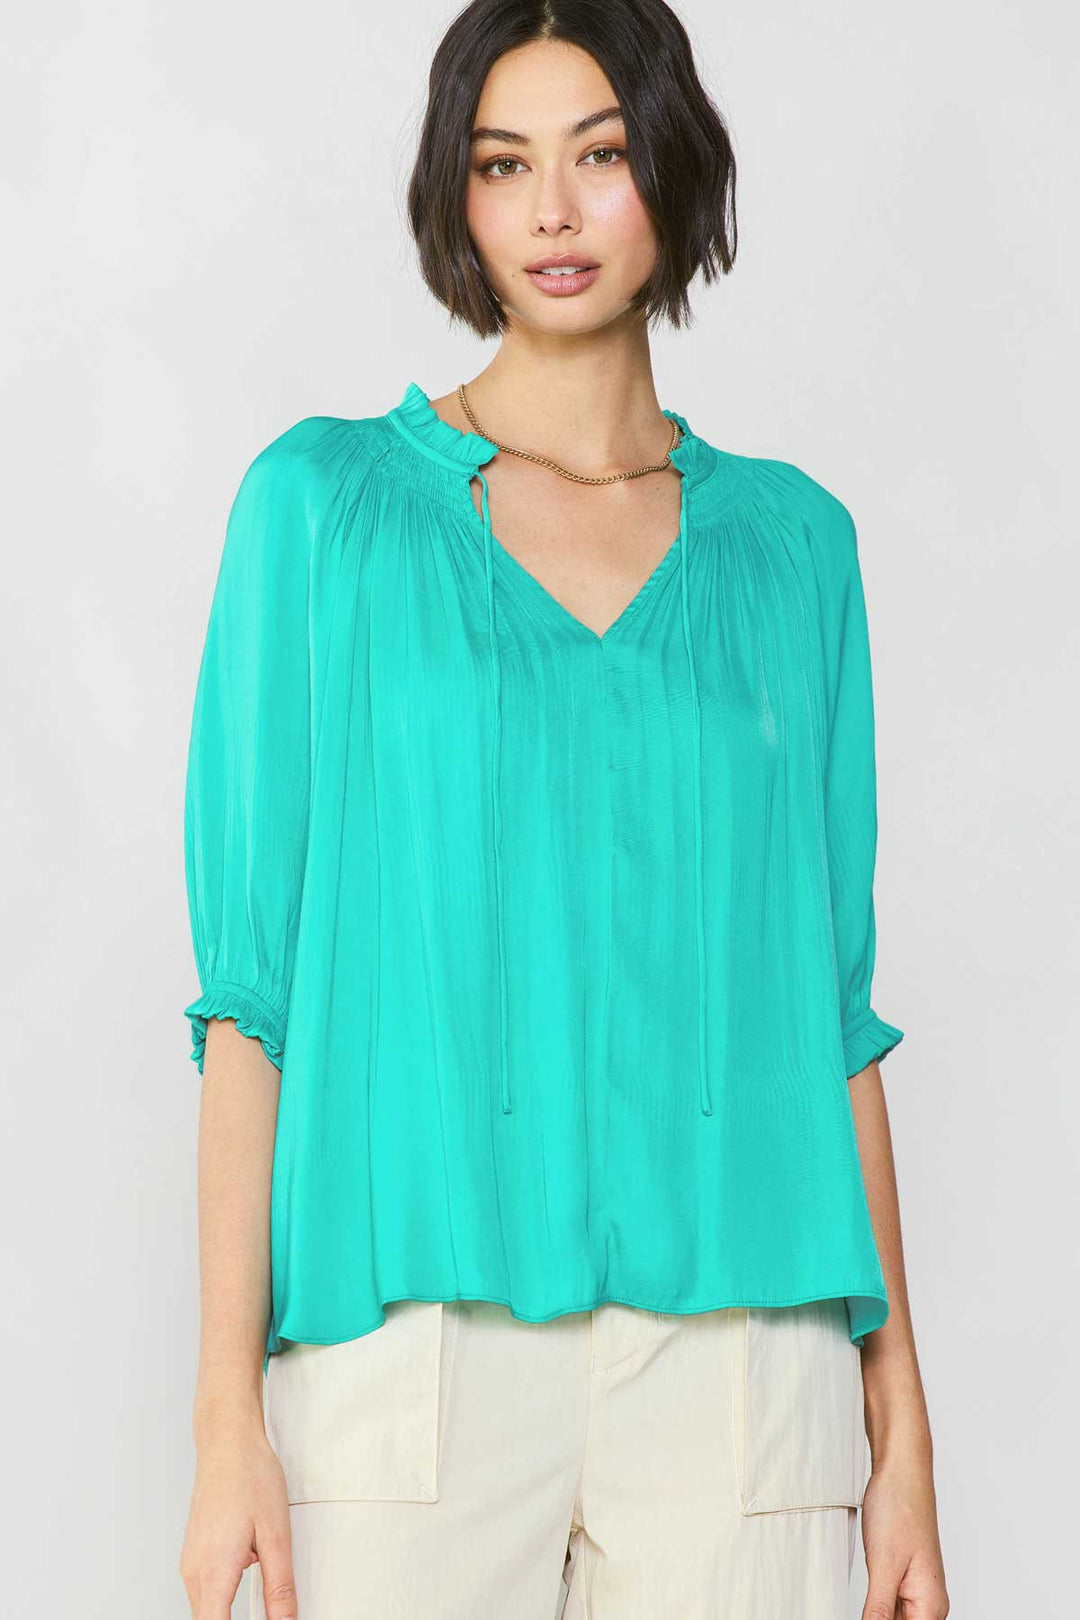 Tequila Time Turquoise Blouse